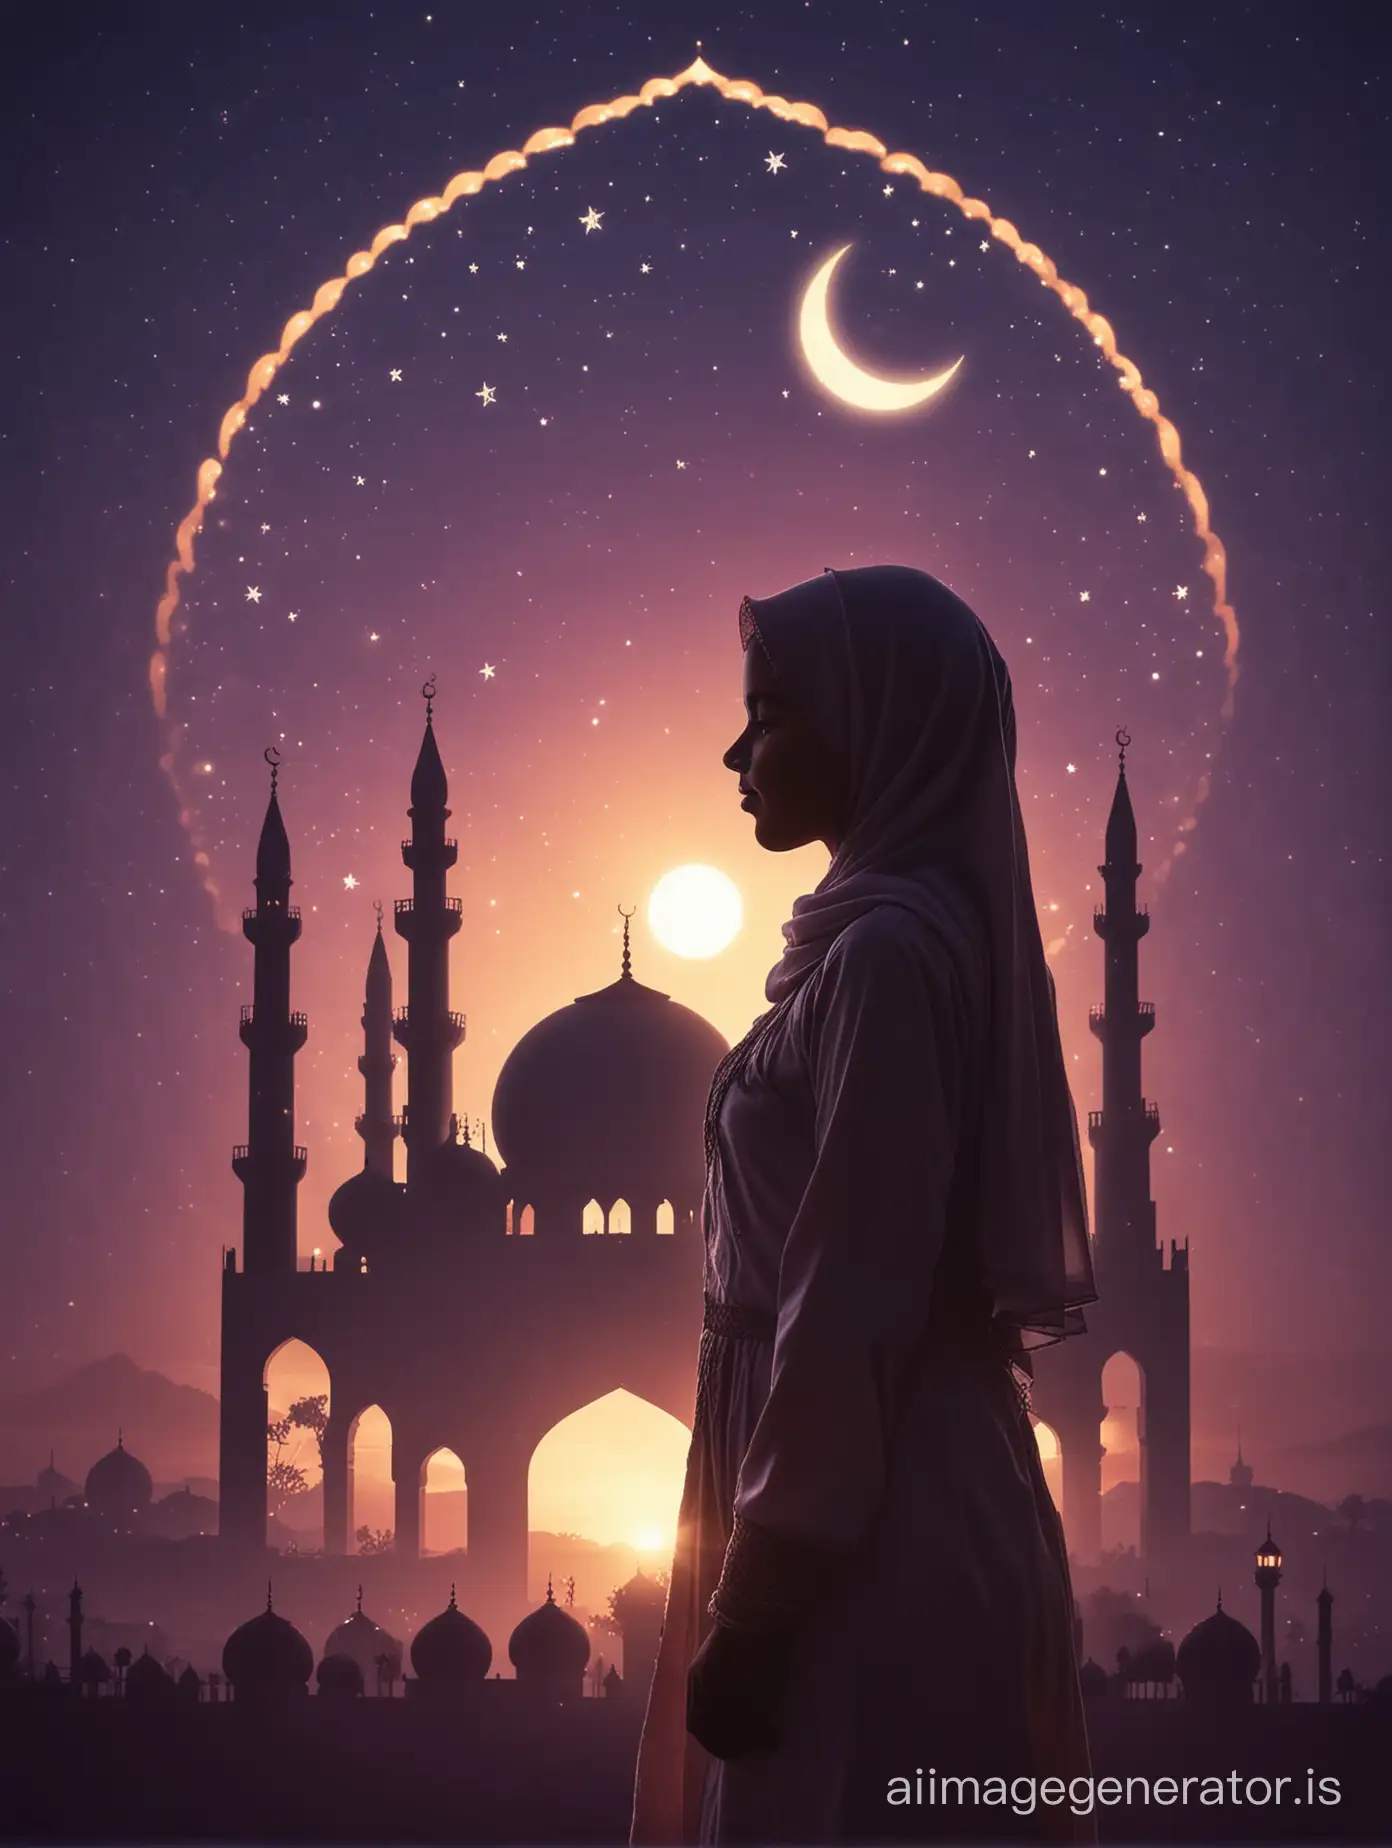 Young Muslim girl saying Eid Mubarak, Eid greetings, first day crescent and mosque silhouette in background, 